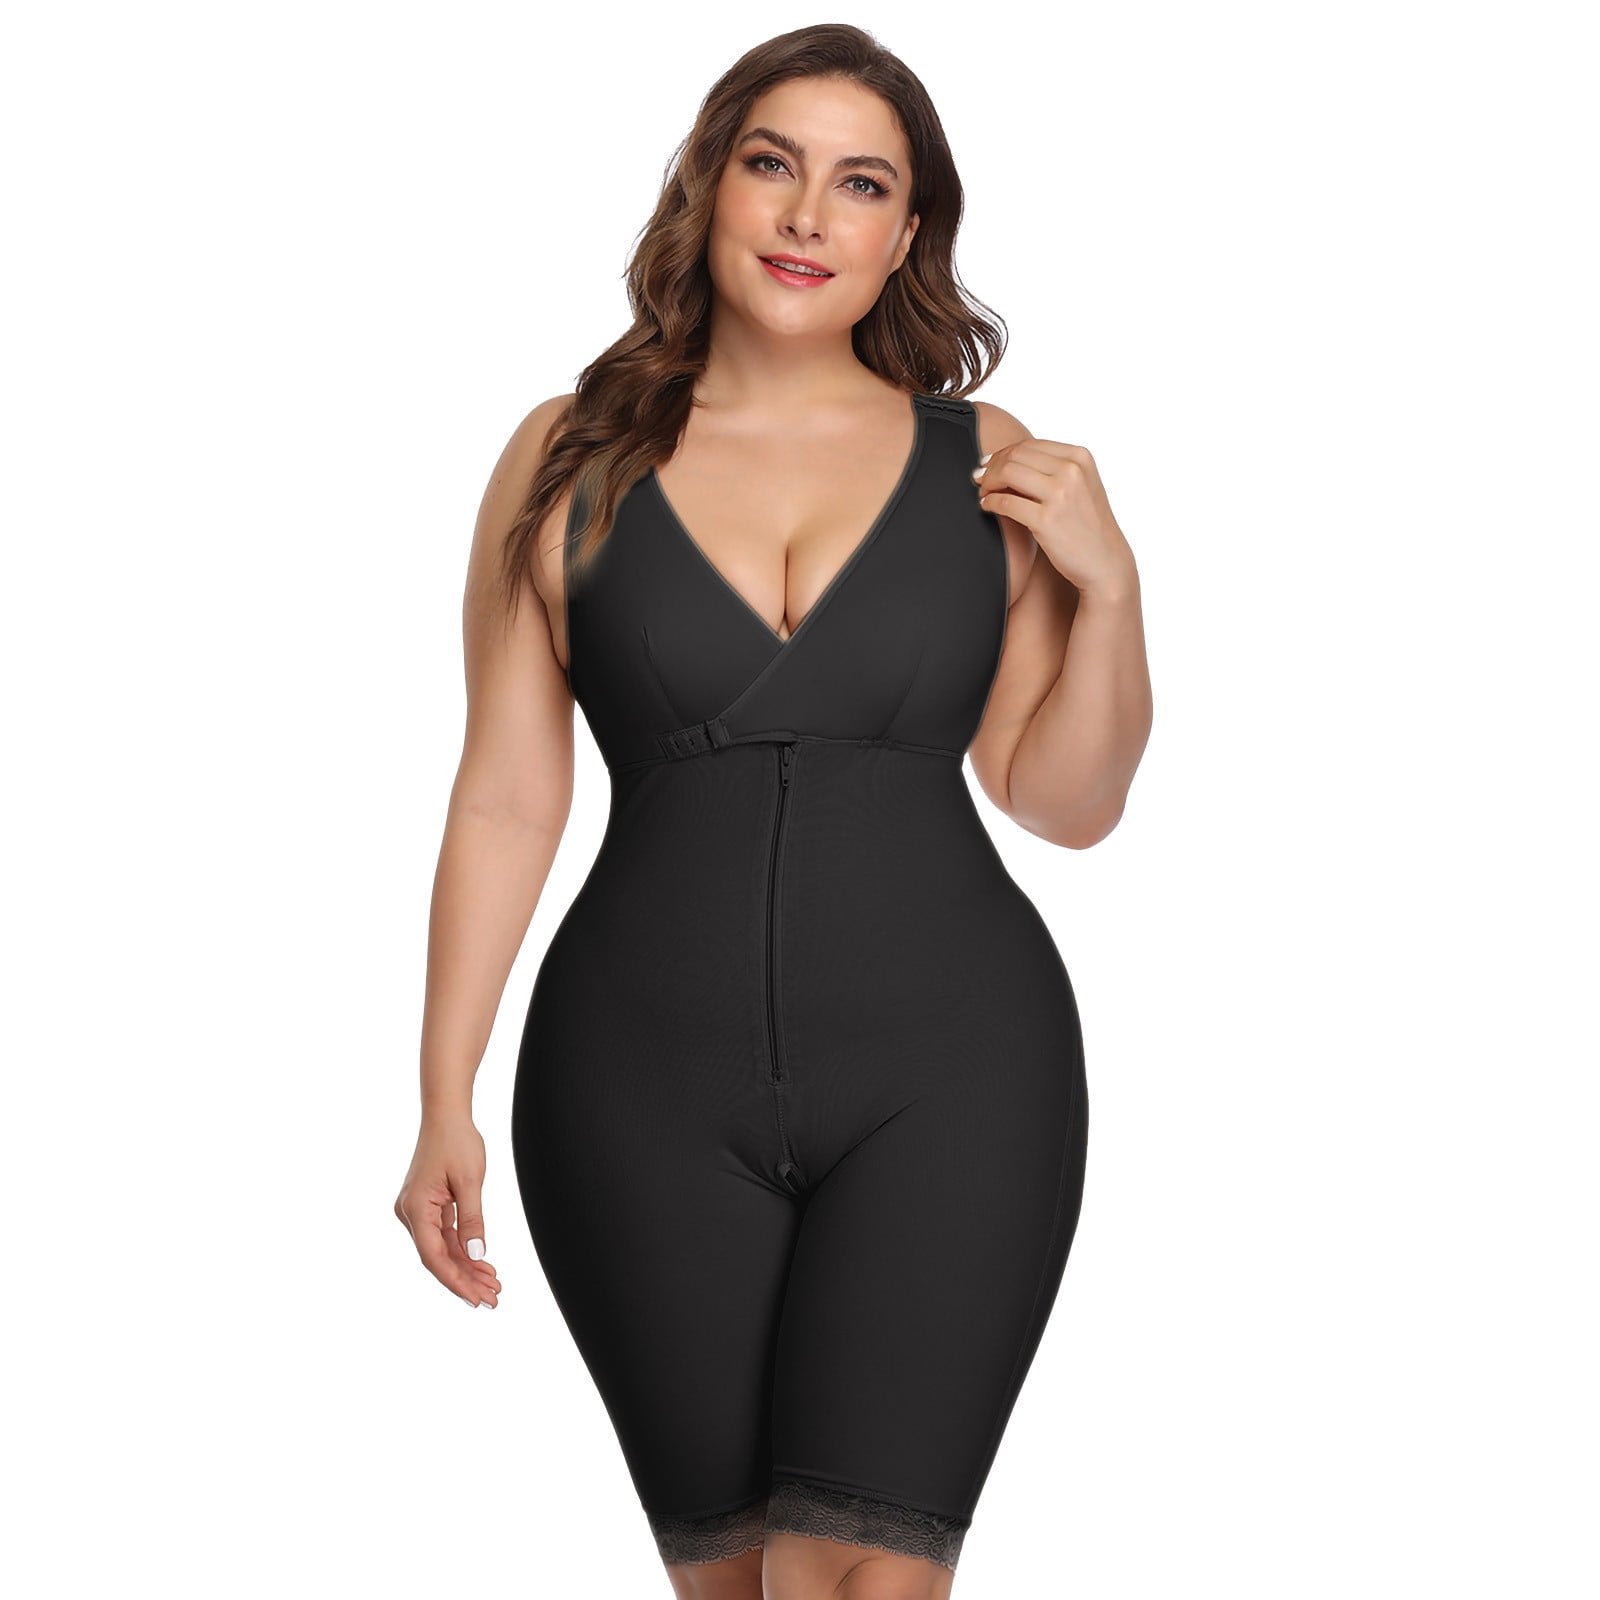 Women's One Piece Shapewear With Bra There Are Underwire Body Shaper  Slimming Clothes S M L XL 2XL